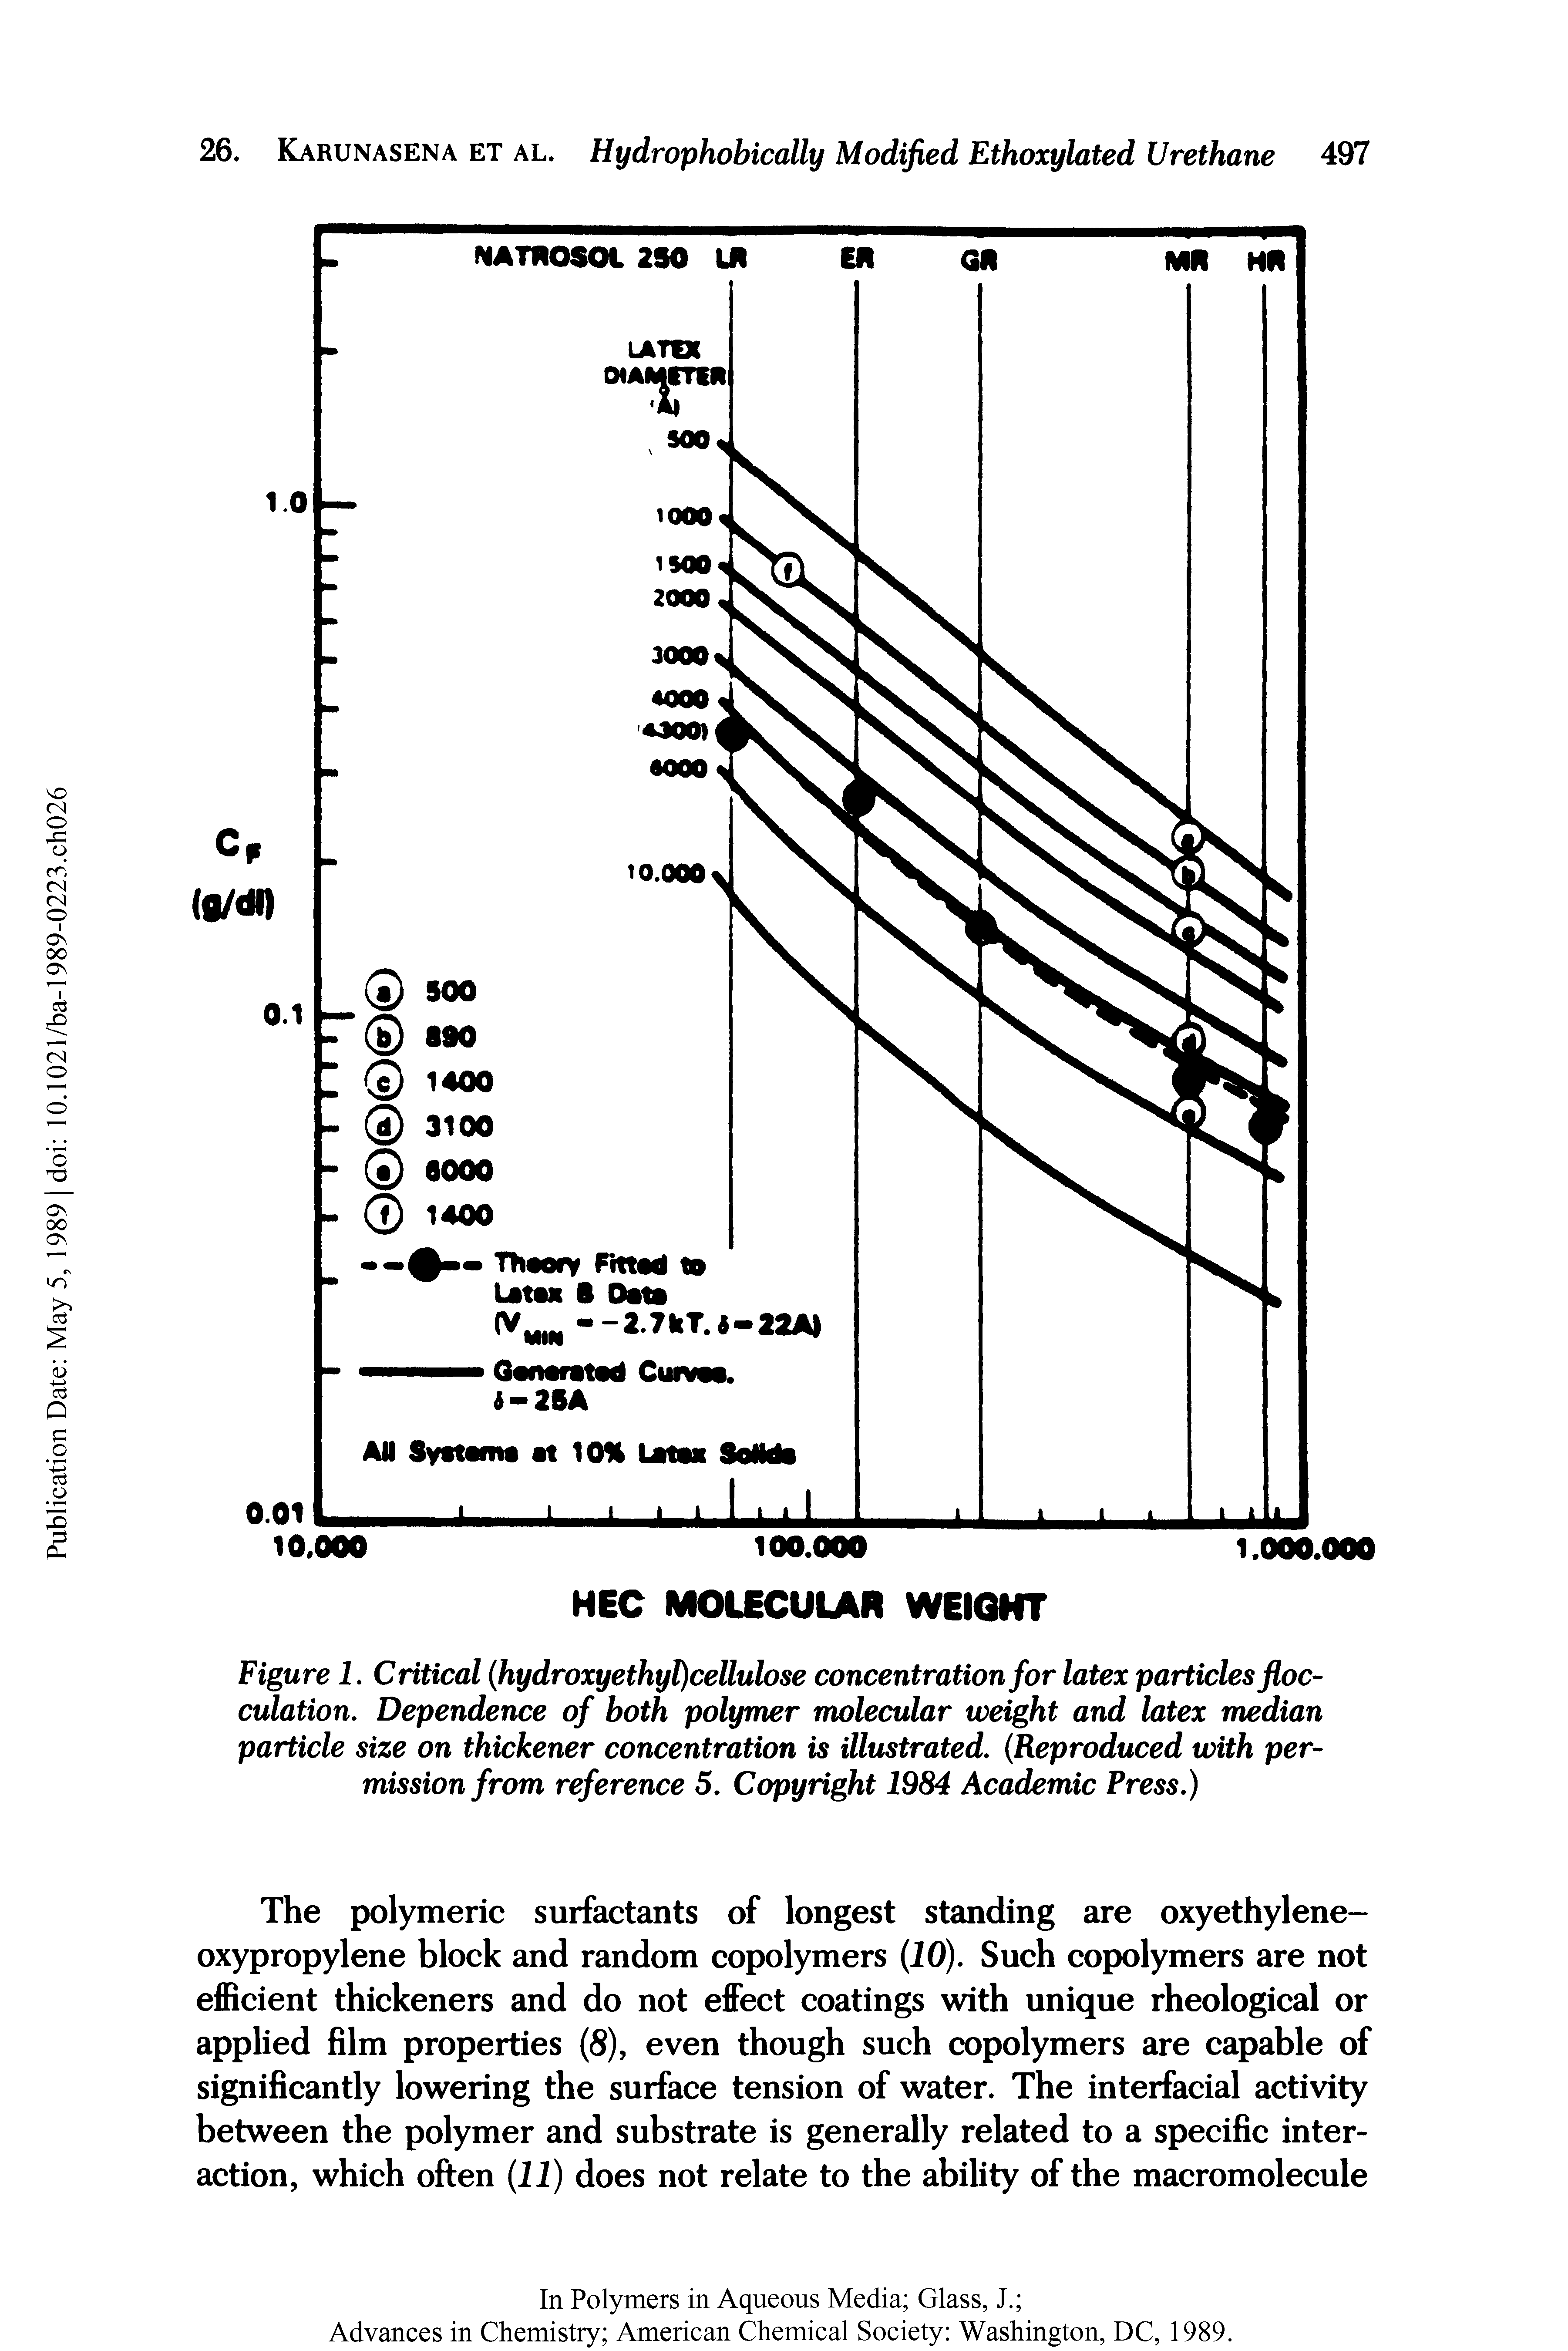 Figure 1. Critical hydroxyethyt)cellulose concentration for latex particles flocculation, Dependence of both polymer molecular weight and latex median particle size on thickener concentration is illustrated. Reproduced with permission from reference 5. Copyright 1984 Academic Press.)...